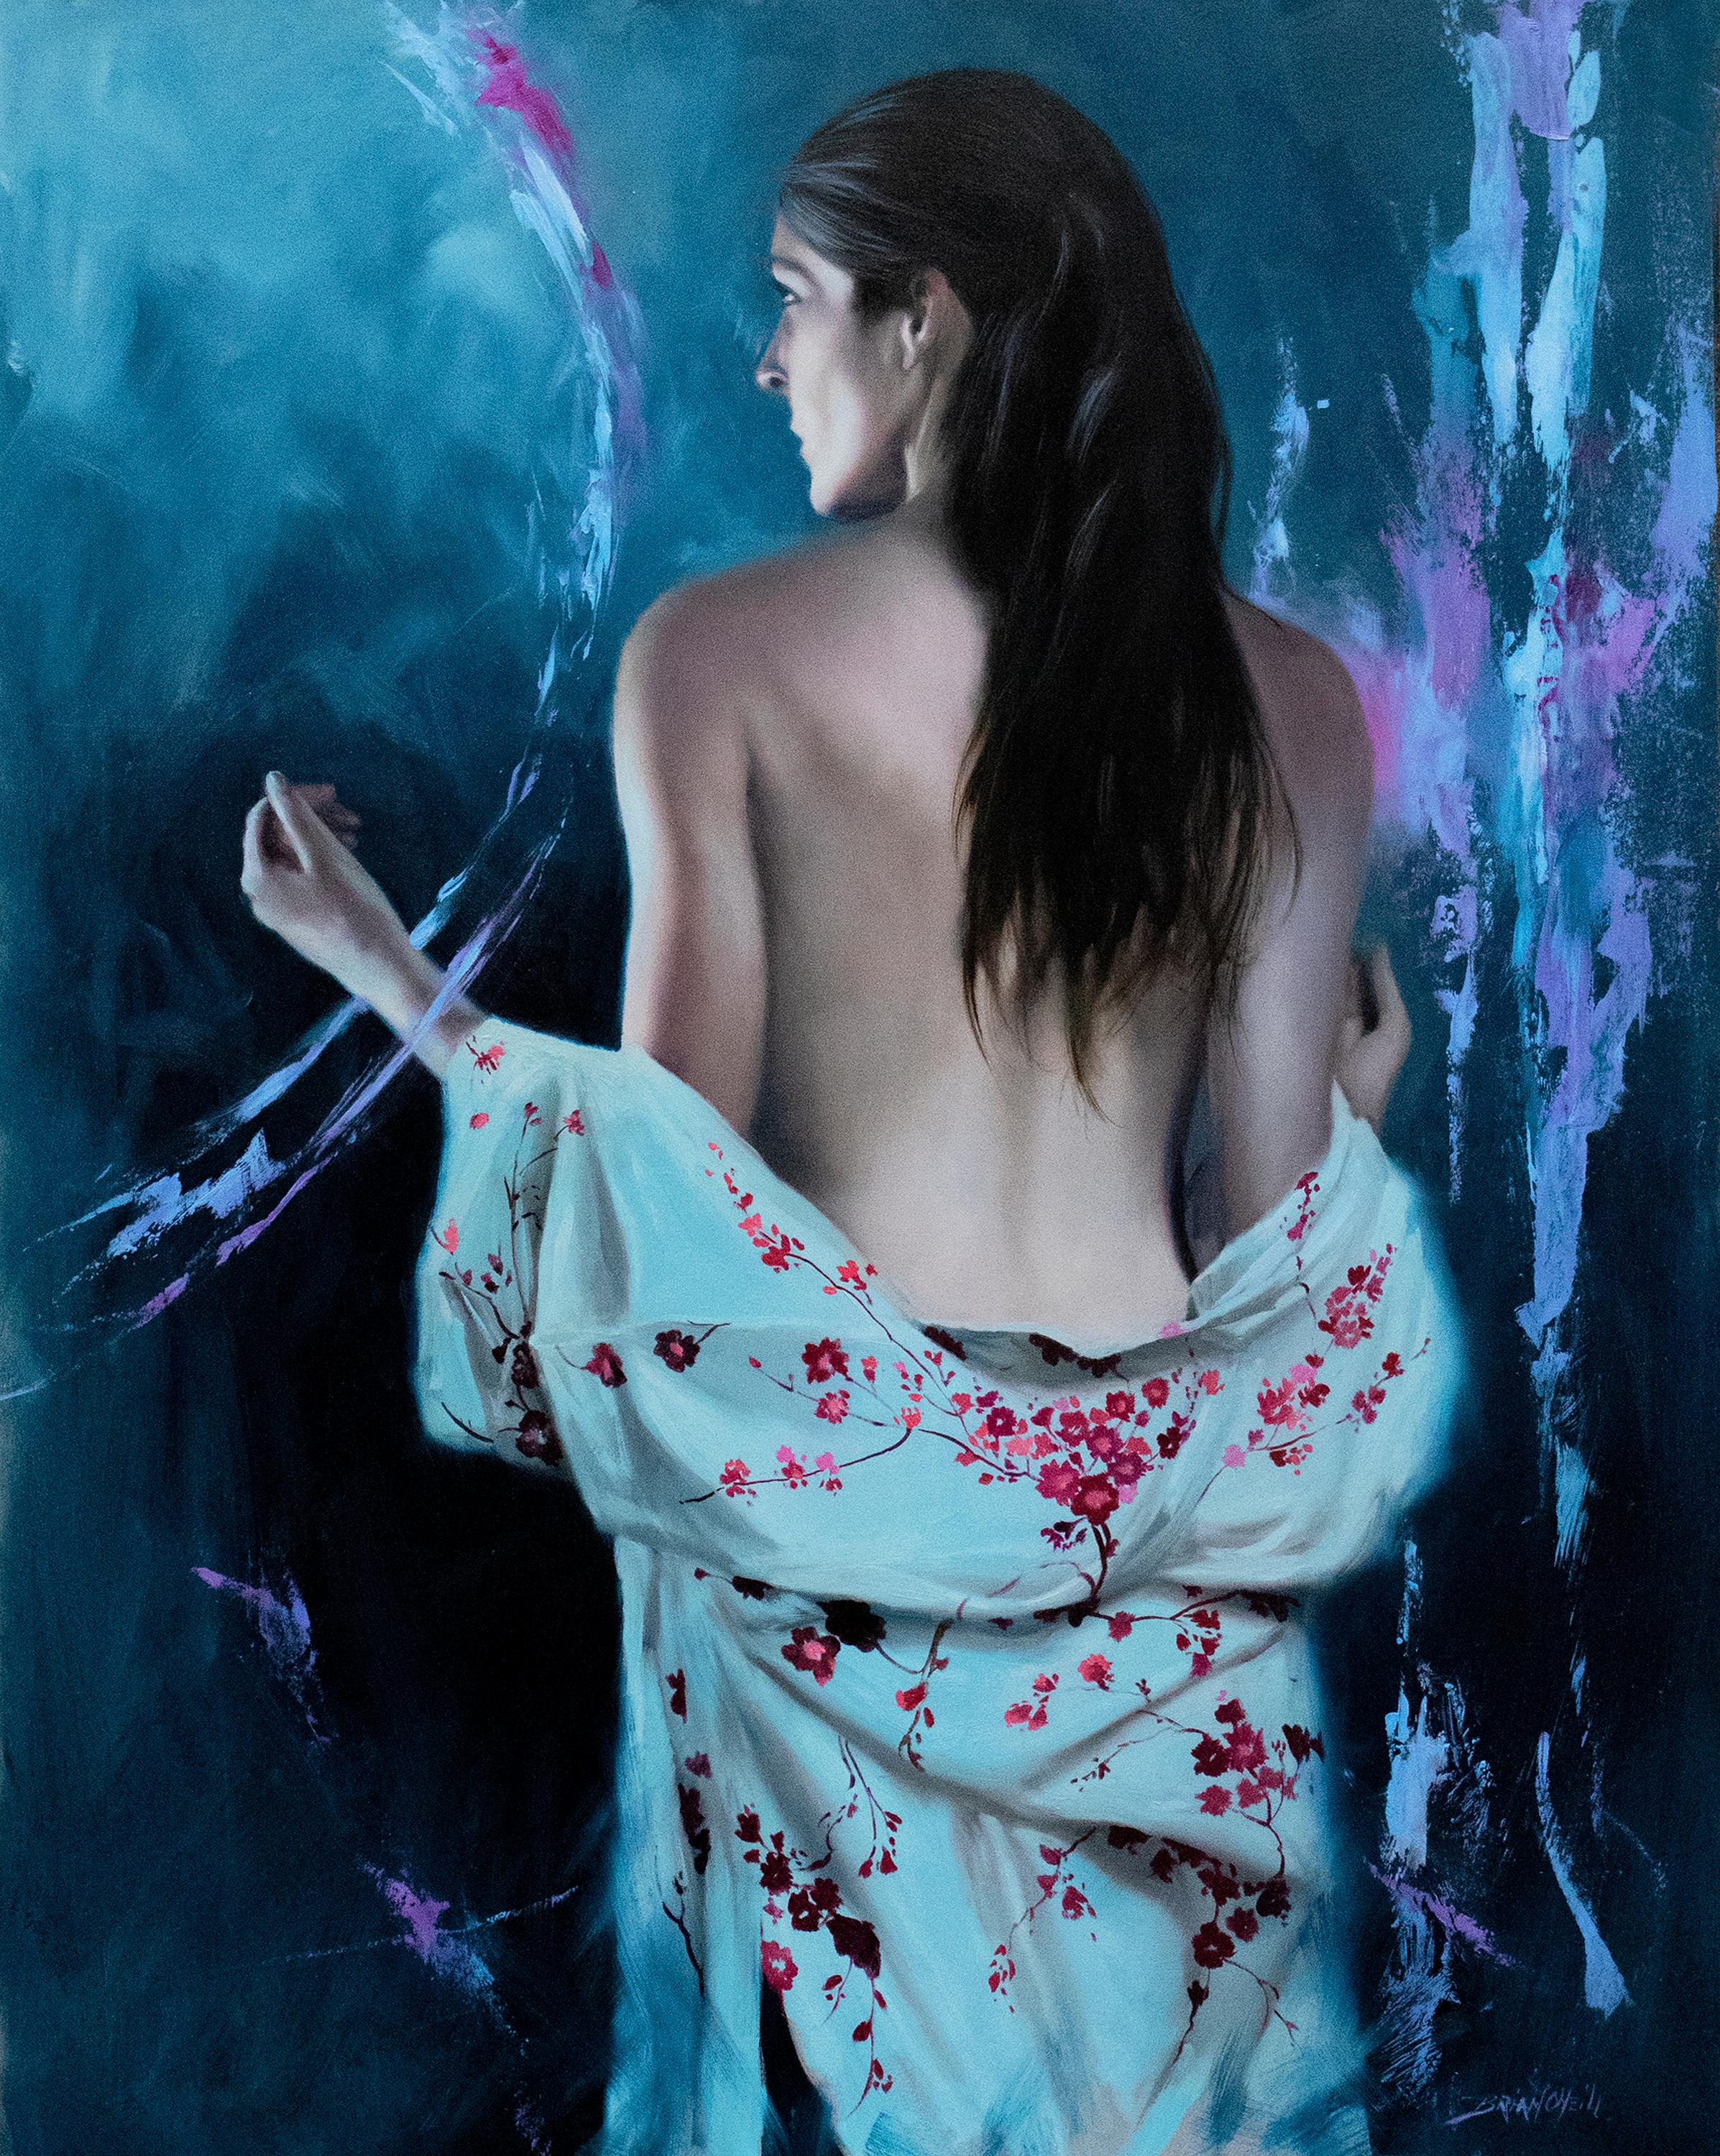 Brian O'Neill Nude Painting - "Moonlight, " Oil painting